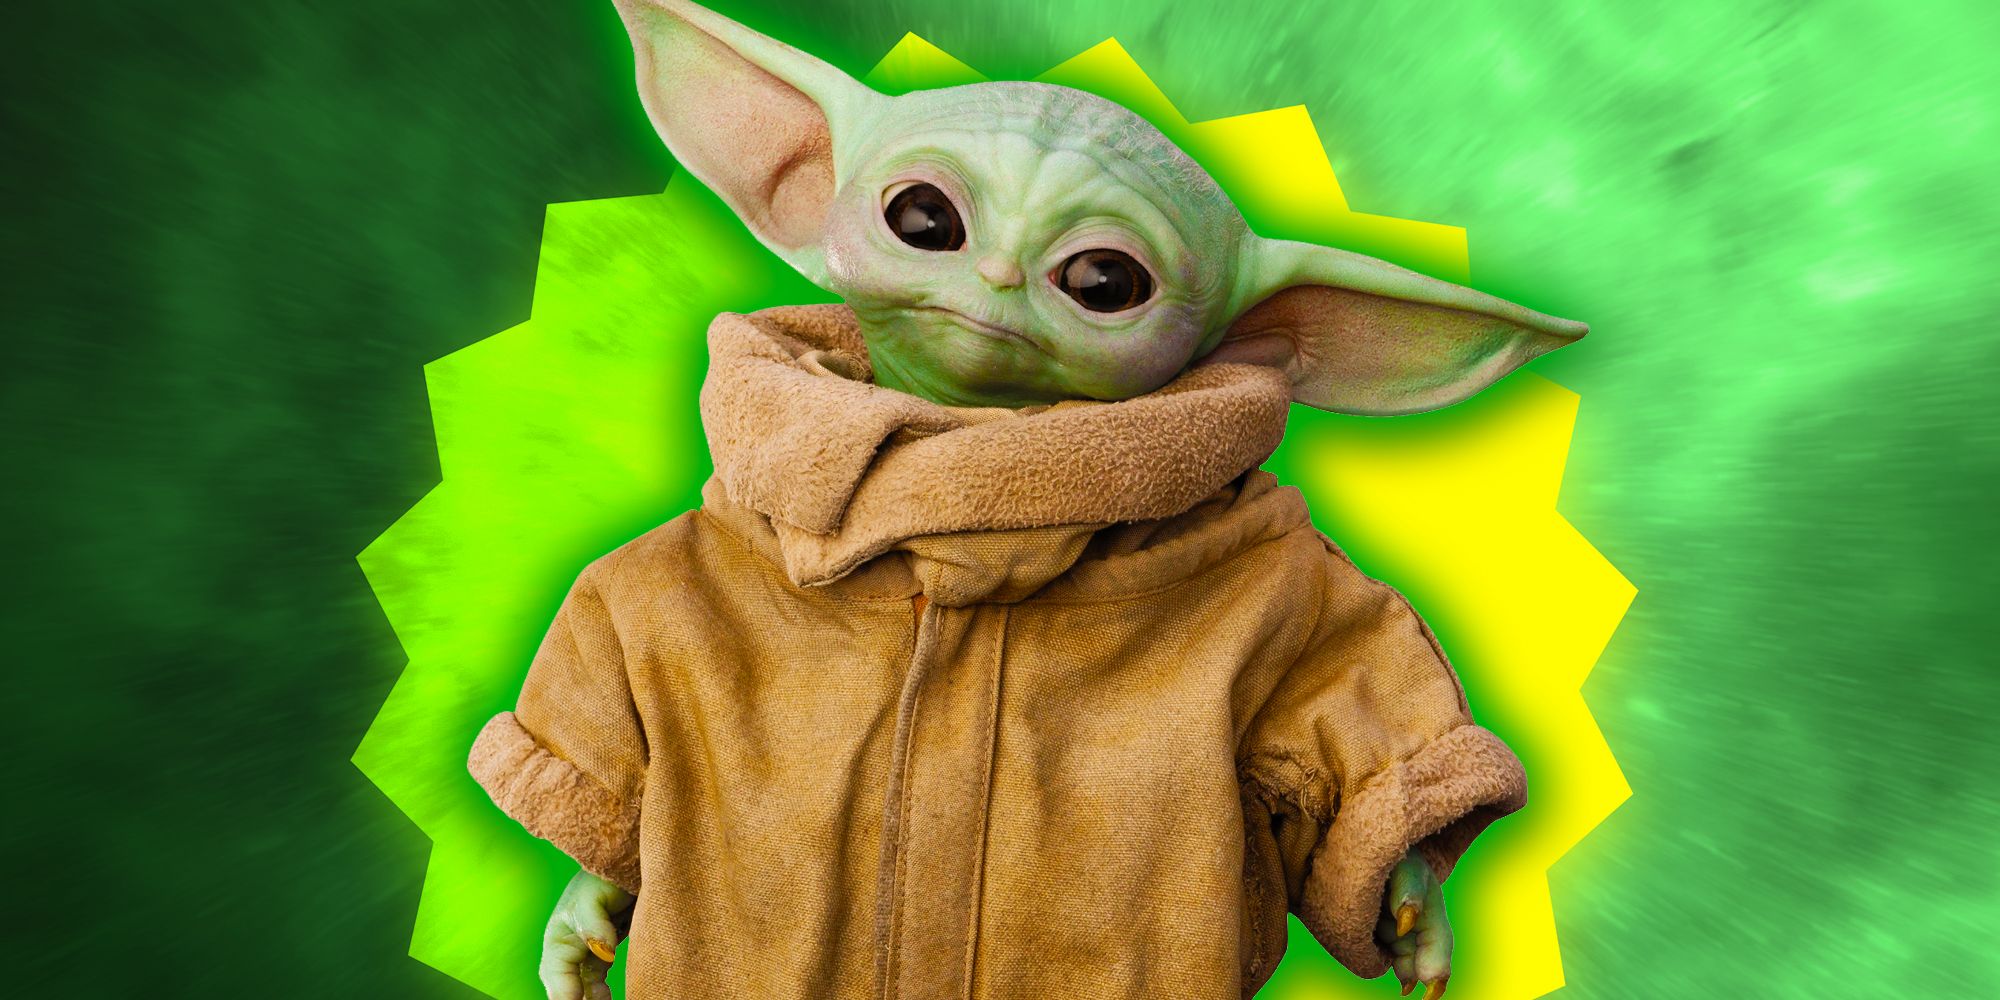 Grogu as he appears in The Mandalorian, superimposed over a dynamic green and yellow background